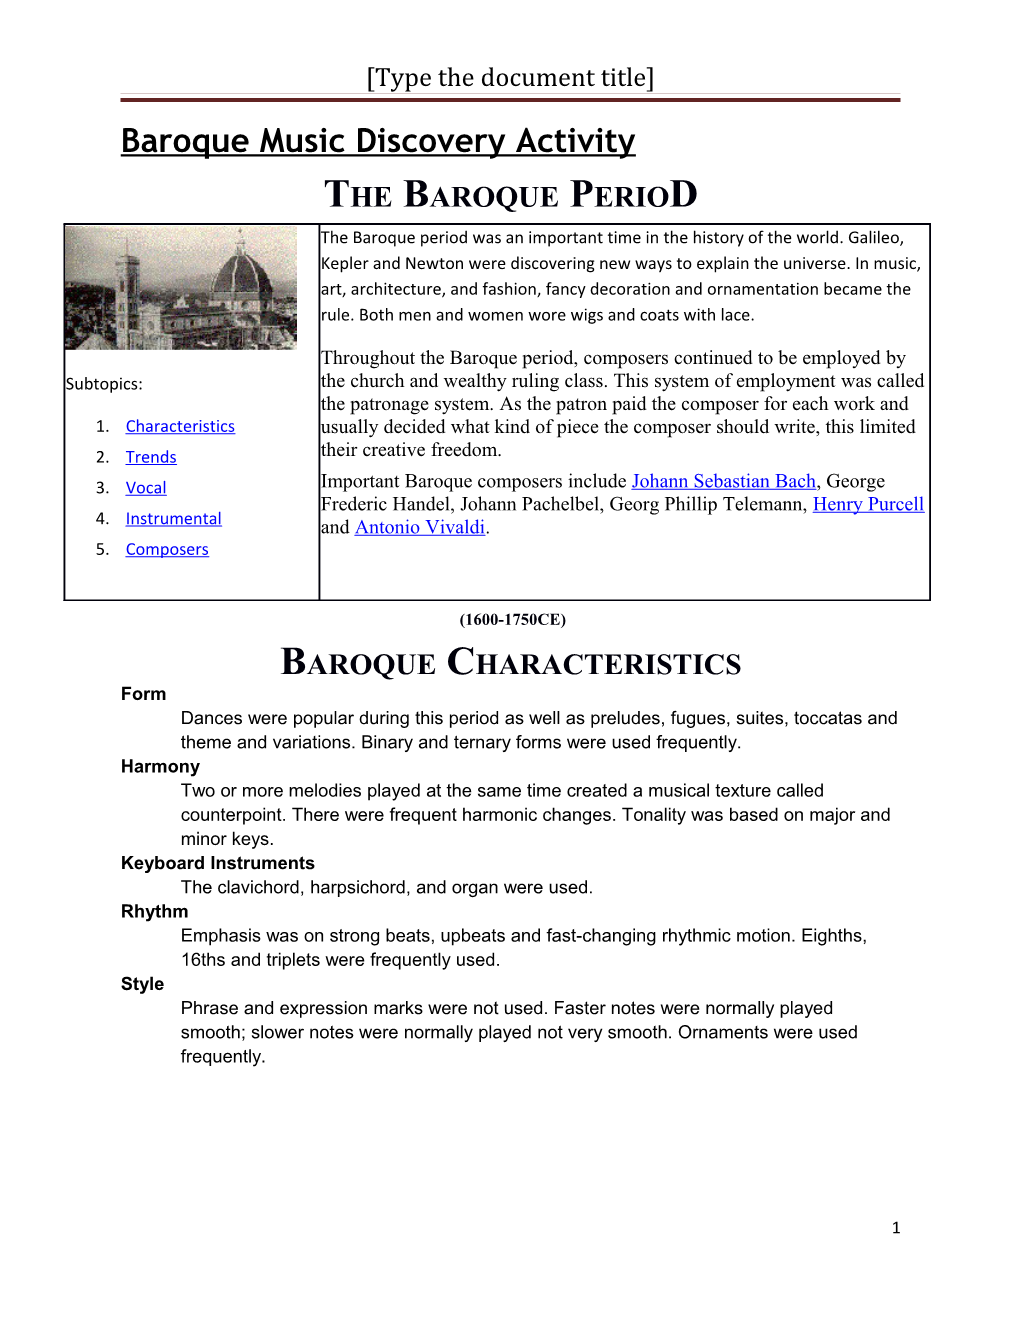 Baroque Music Discovery Activity